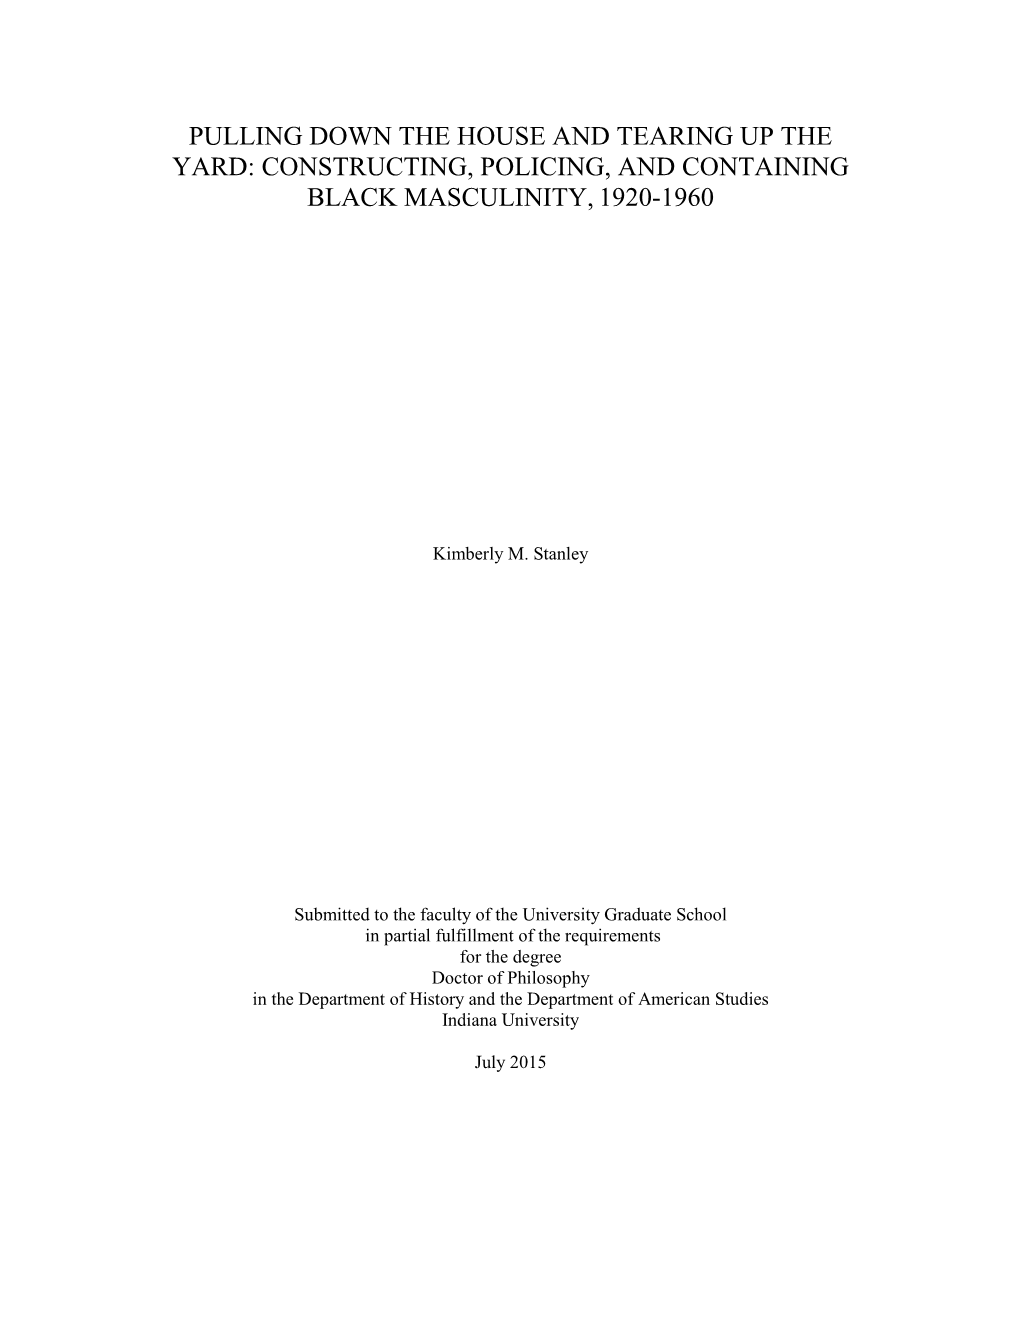 Constructing, Policing, and Containing Black Masculinity, 1920-1960